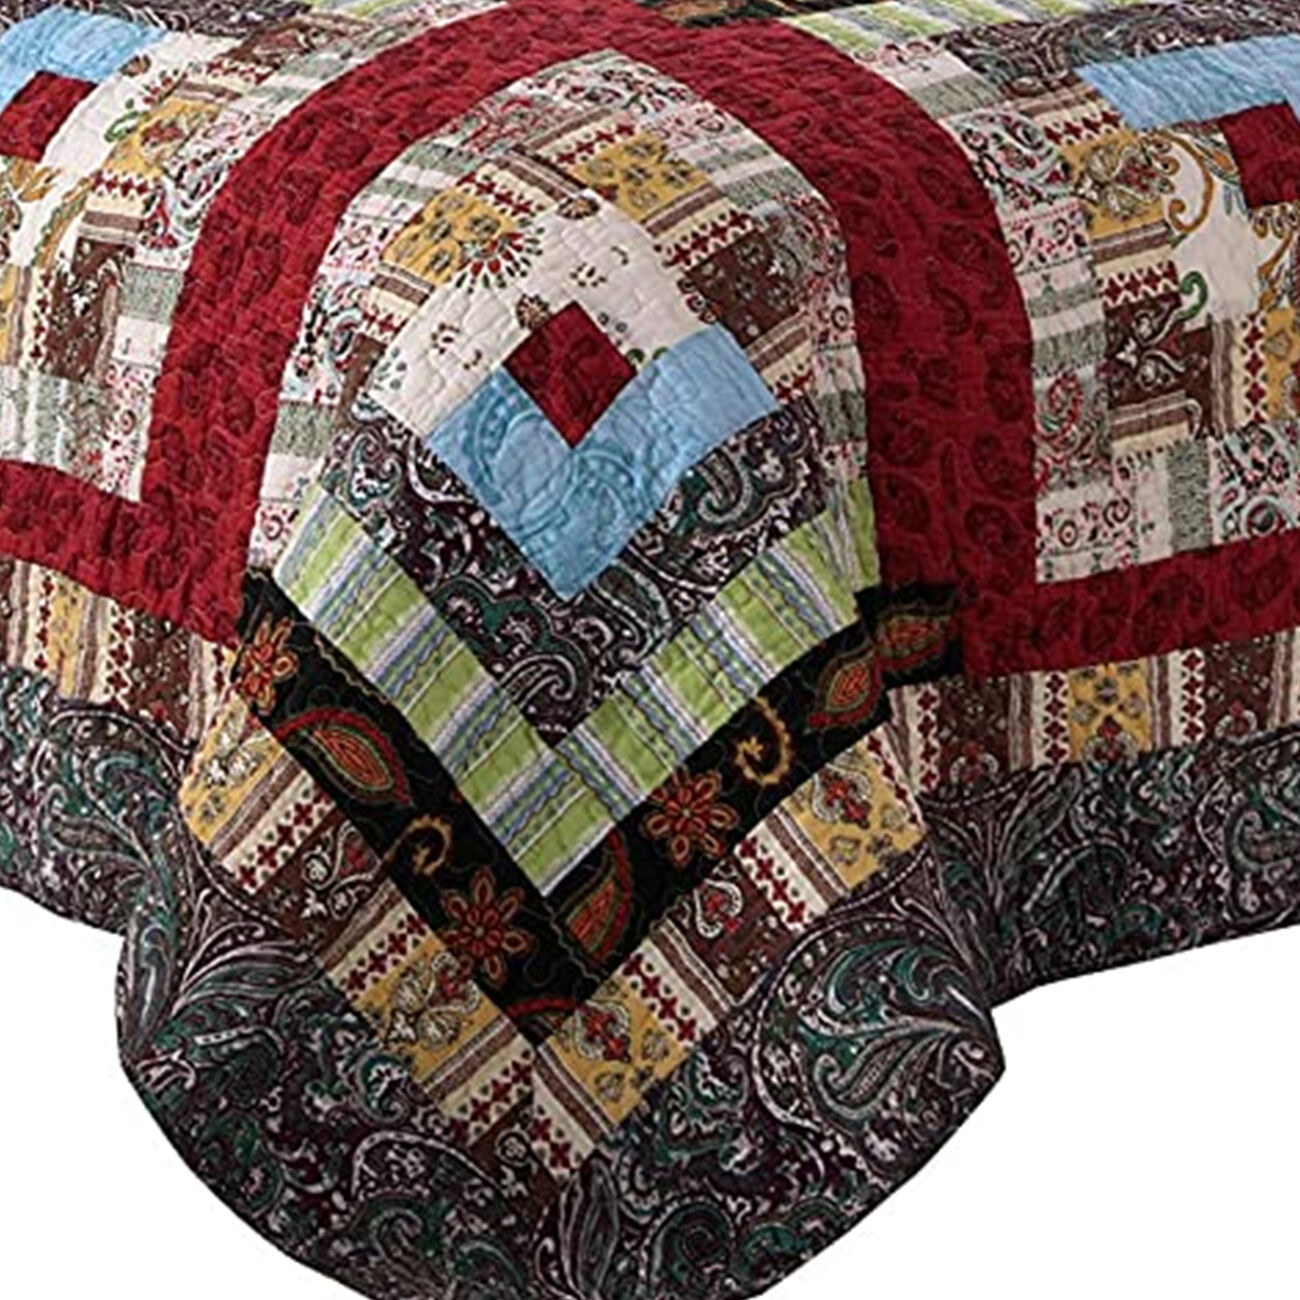 Thames 3 Piece King Size Cotton Quilt Set with Log Cabin Pattern, Multicolor